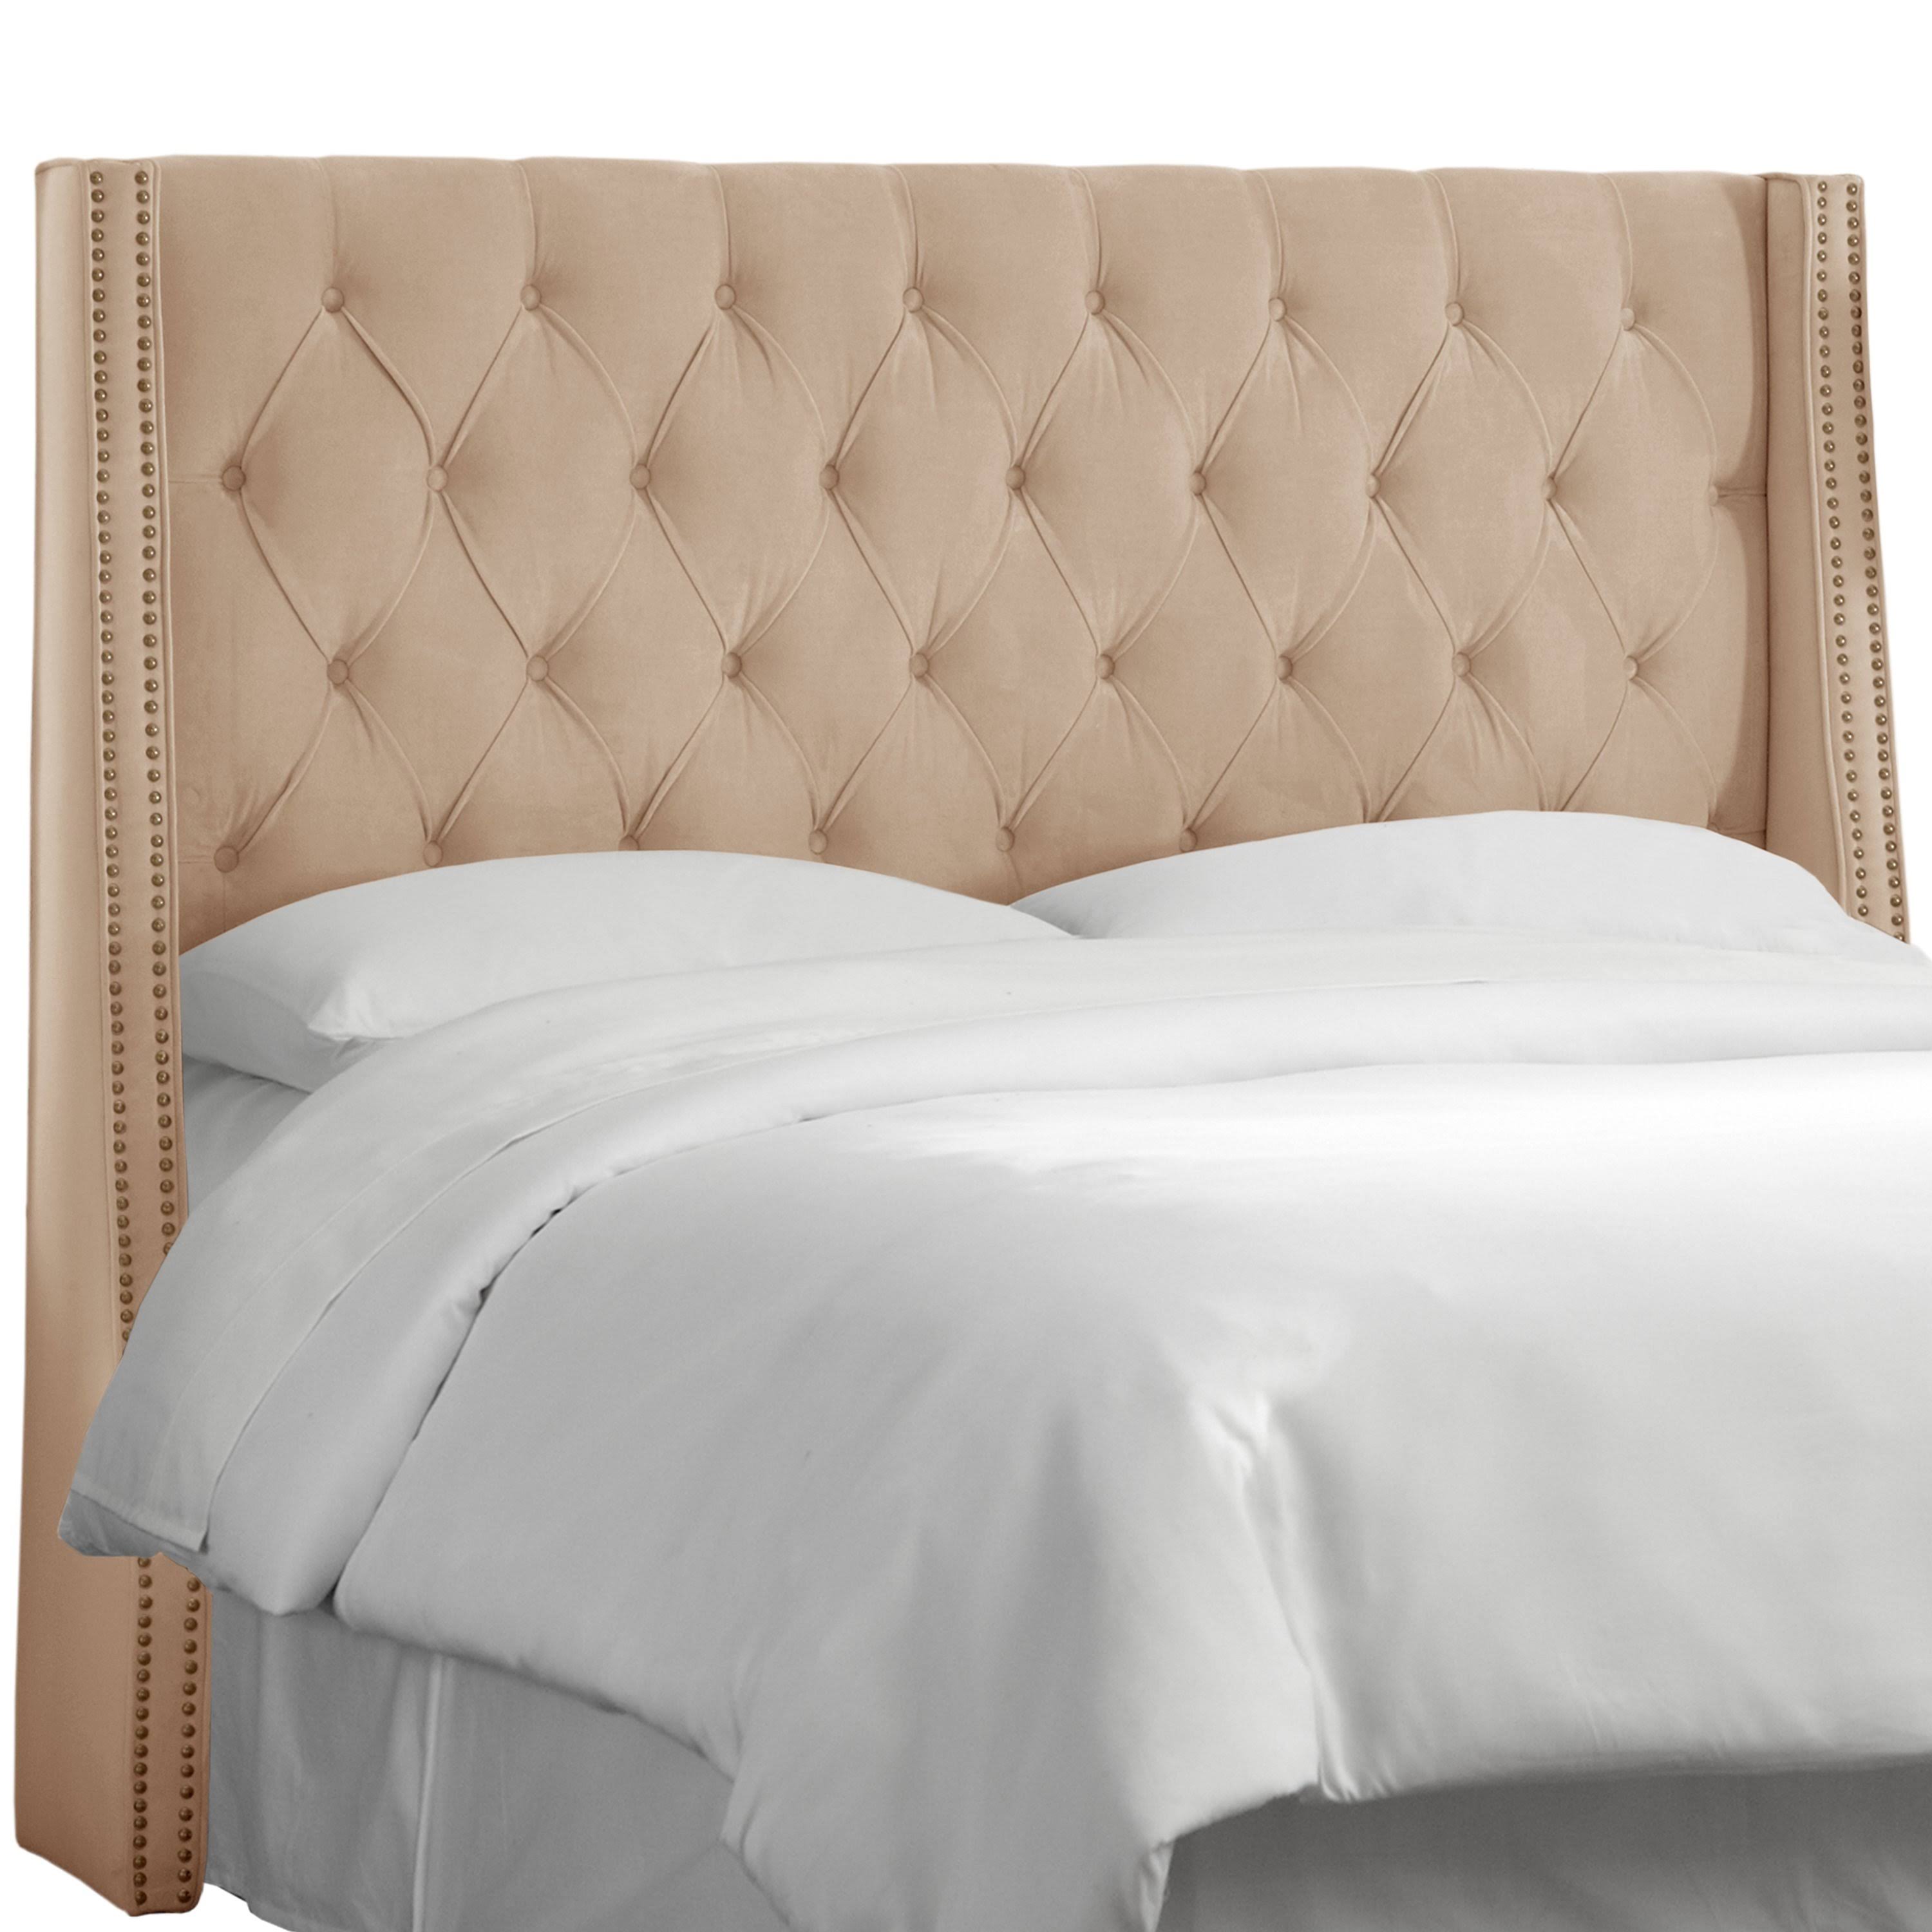 Cream Tufted Wingback Queen Upholstered Headboard Wxf 02